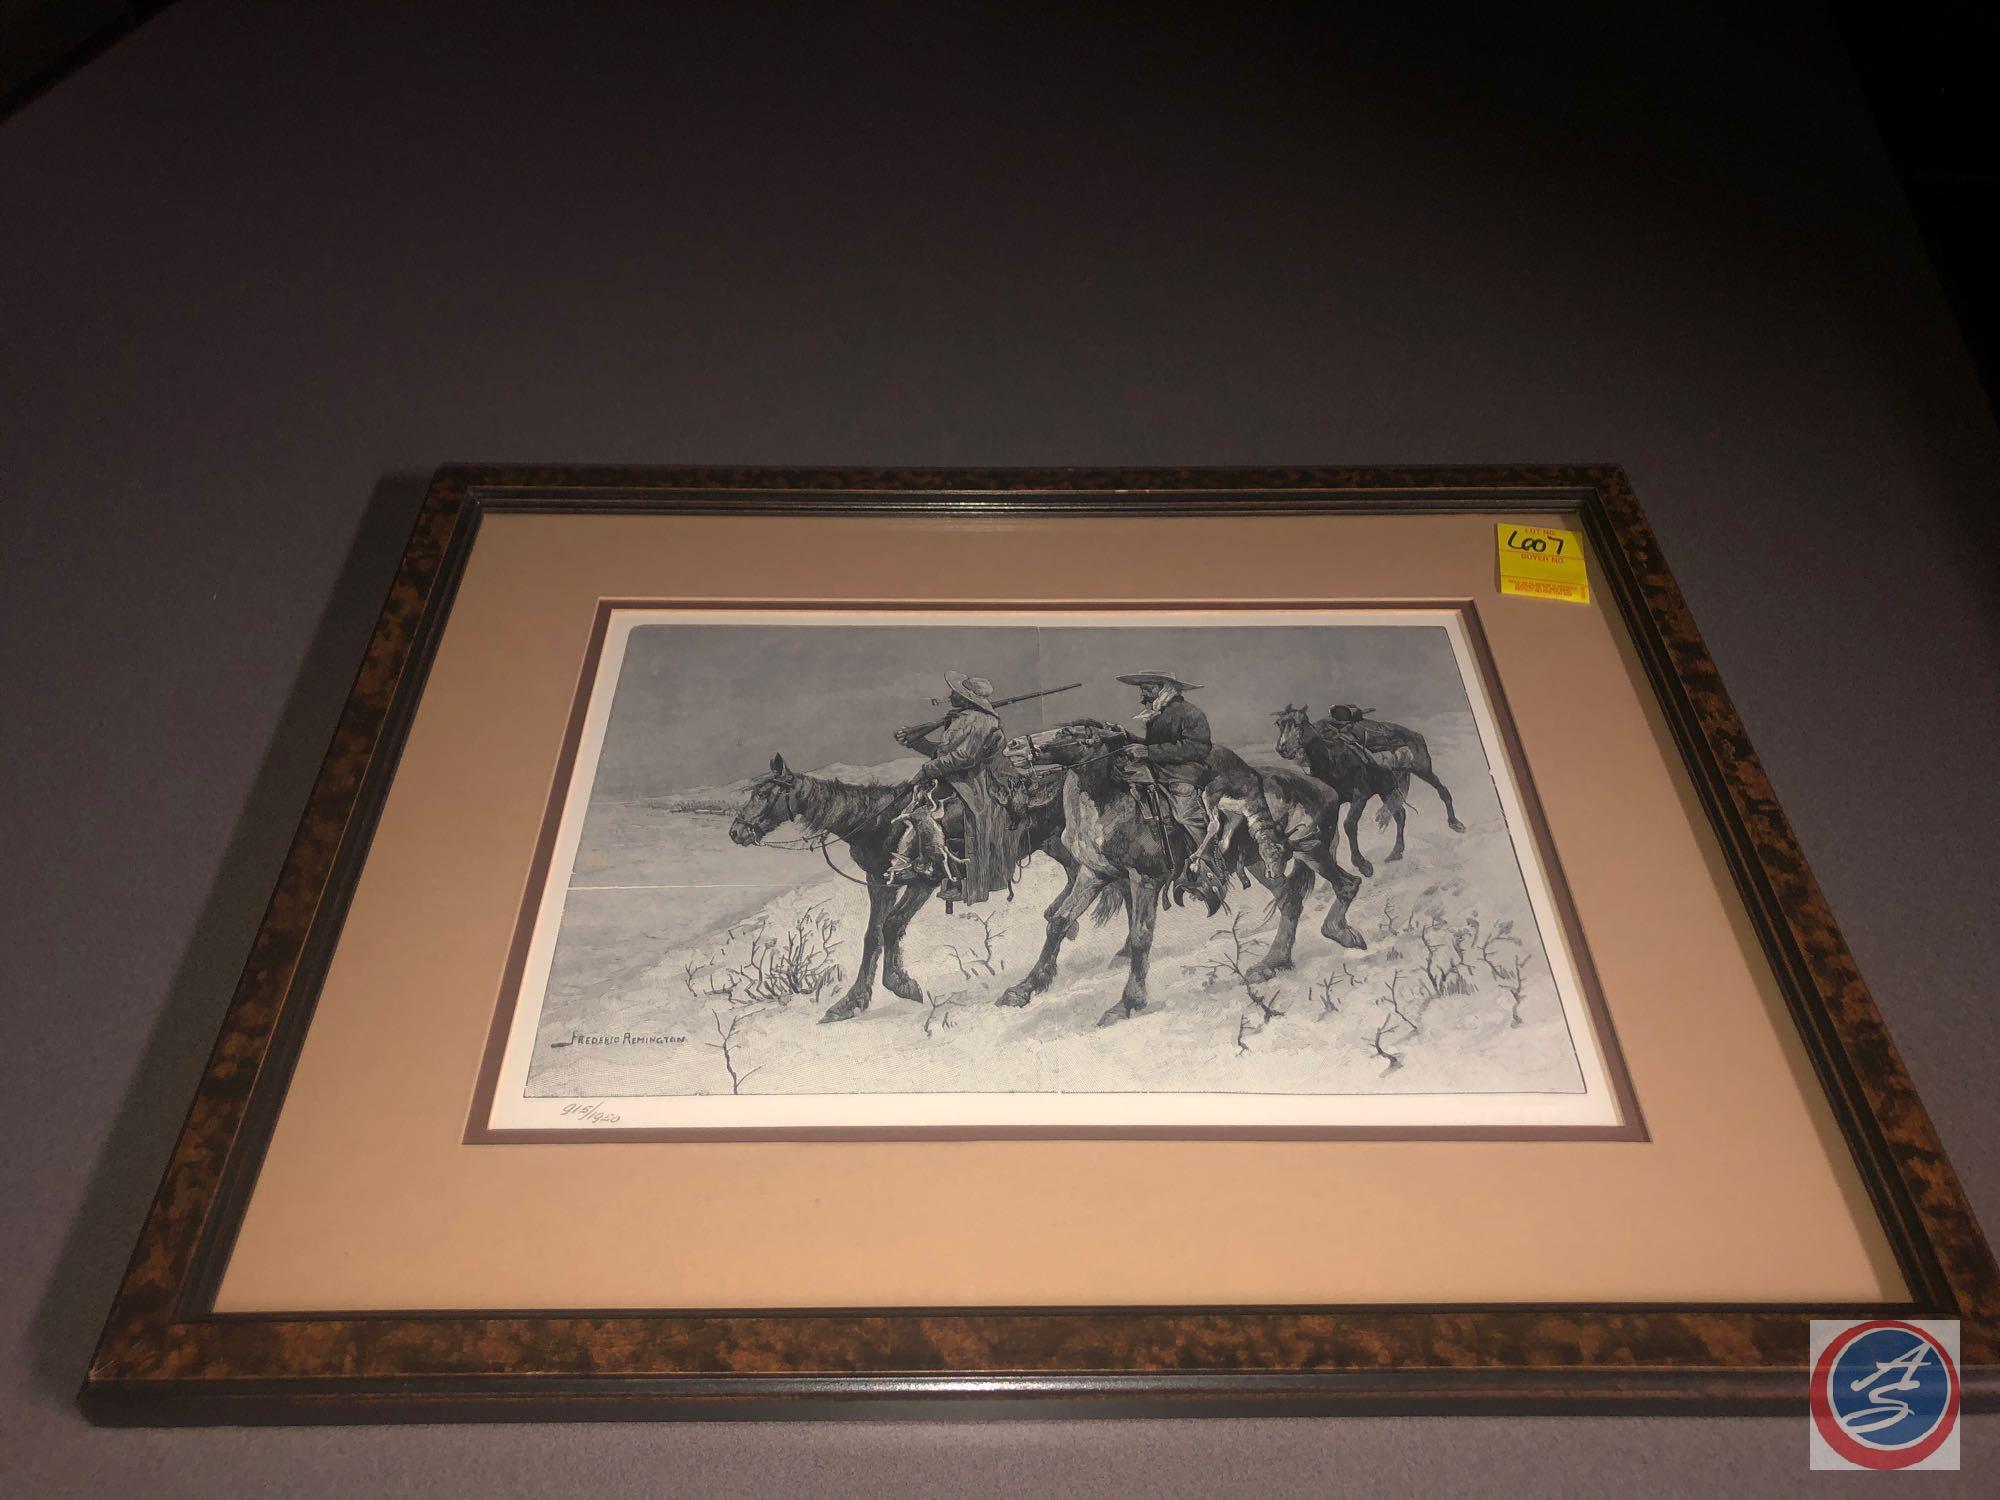 Framed Wood Block Engraving Titled Thanksgiving Dinner for the Ranch by Frederic Remington